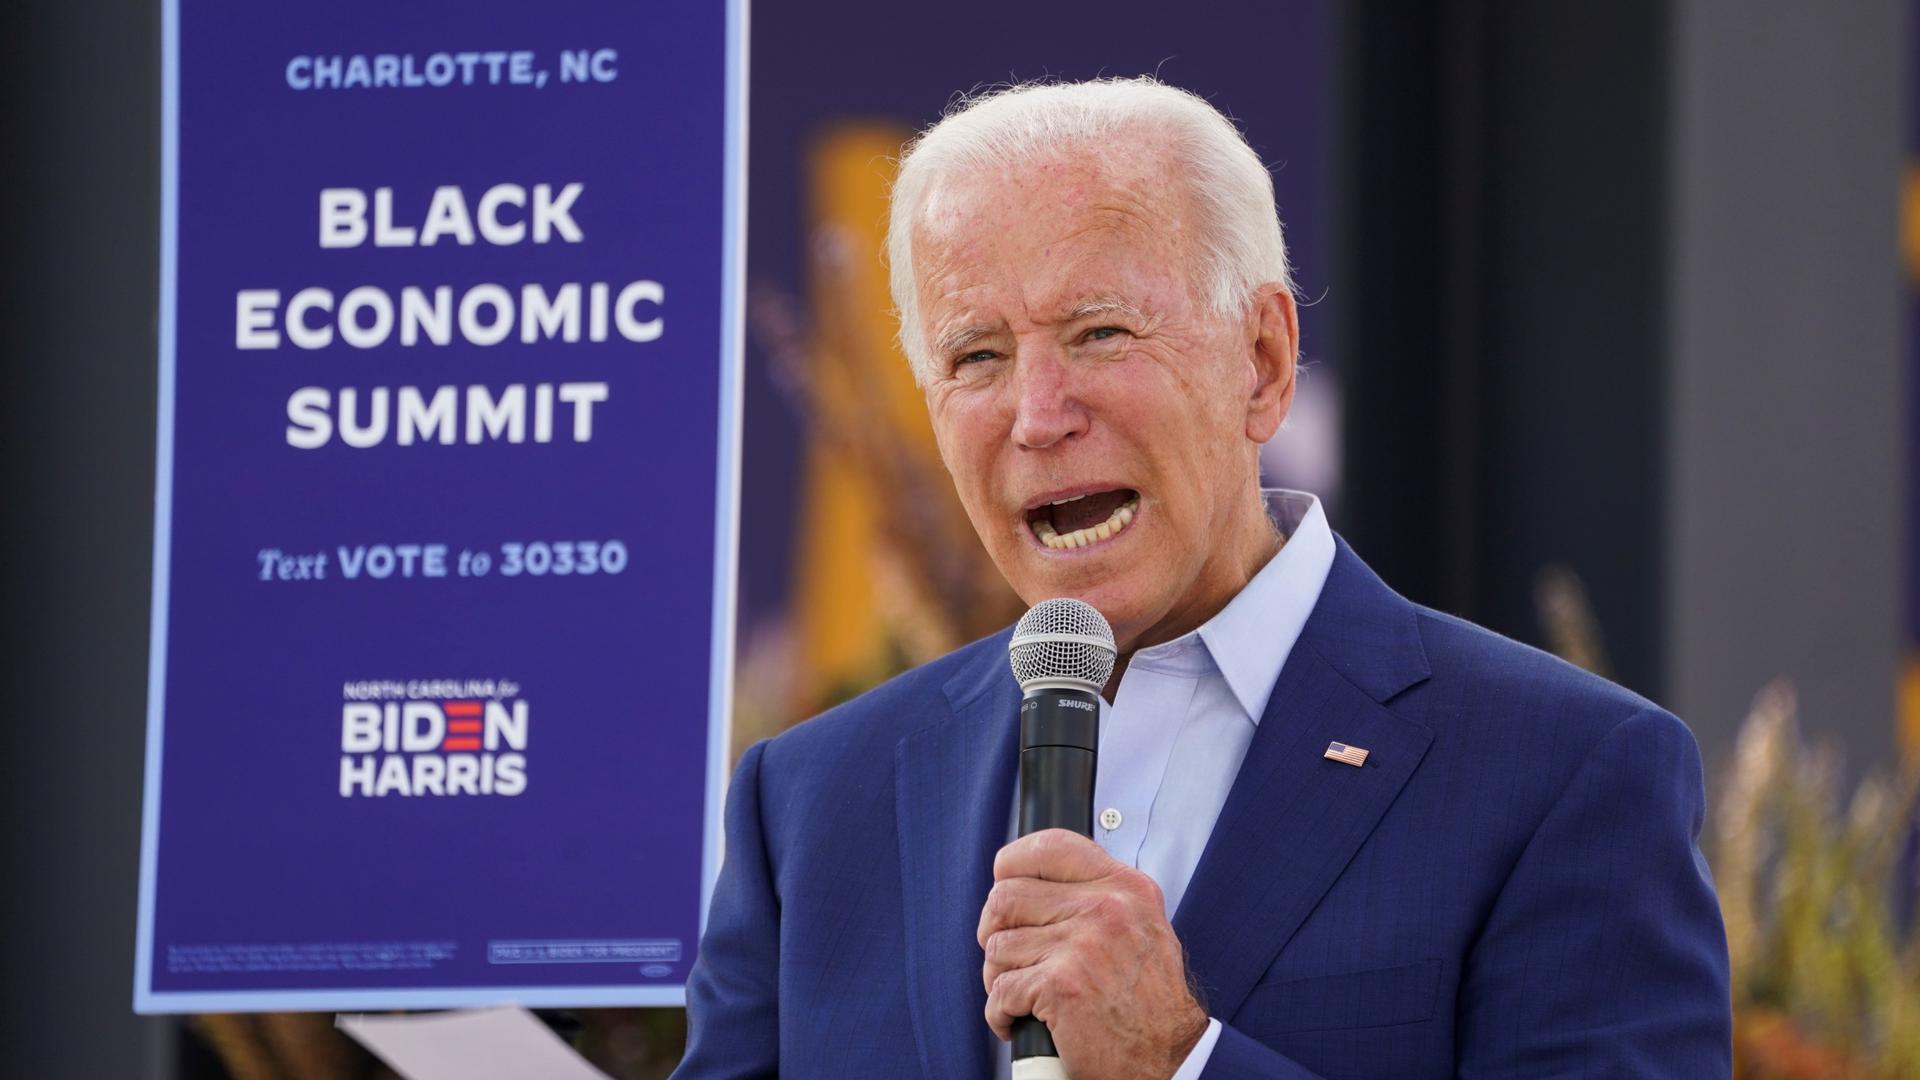 Democratic US presidential nominee Joe Biden speaks at an outdoor "Black Economic Summit" while campaigning for president in Charlotte, North Carolina, Sept. 23, 2020. 